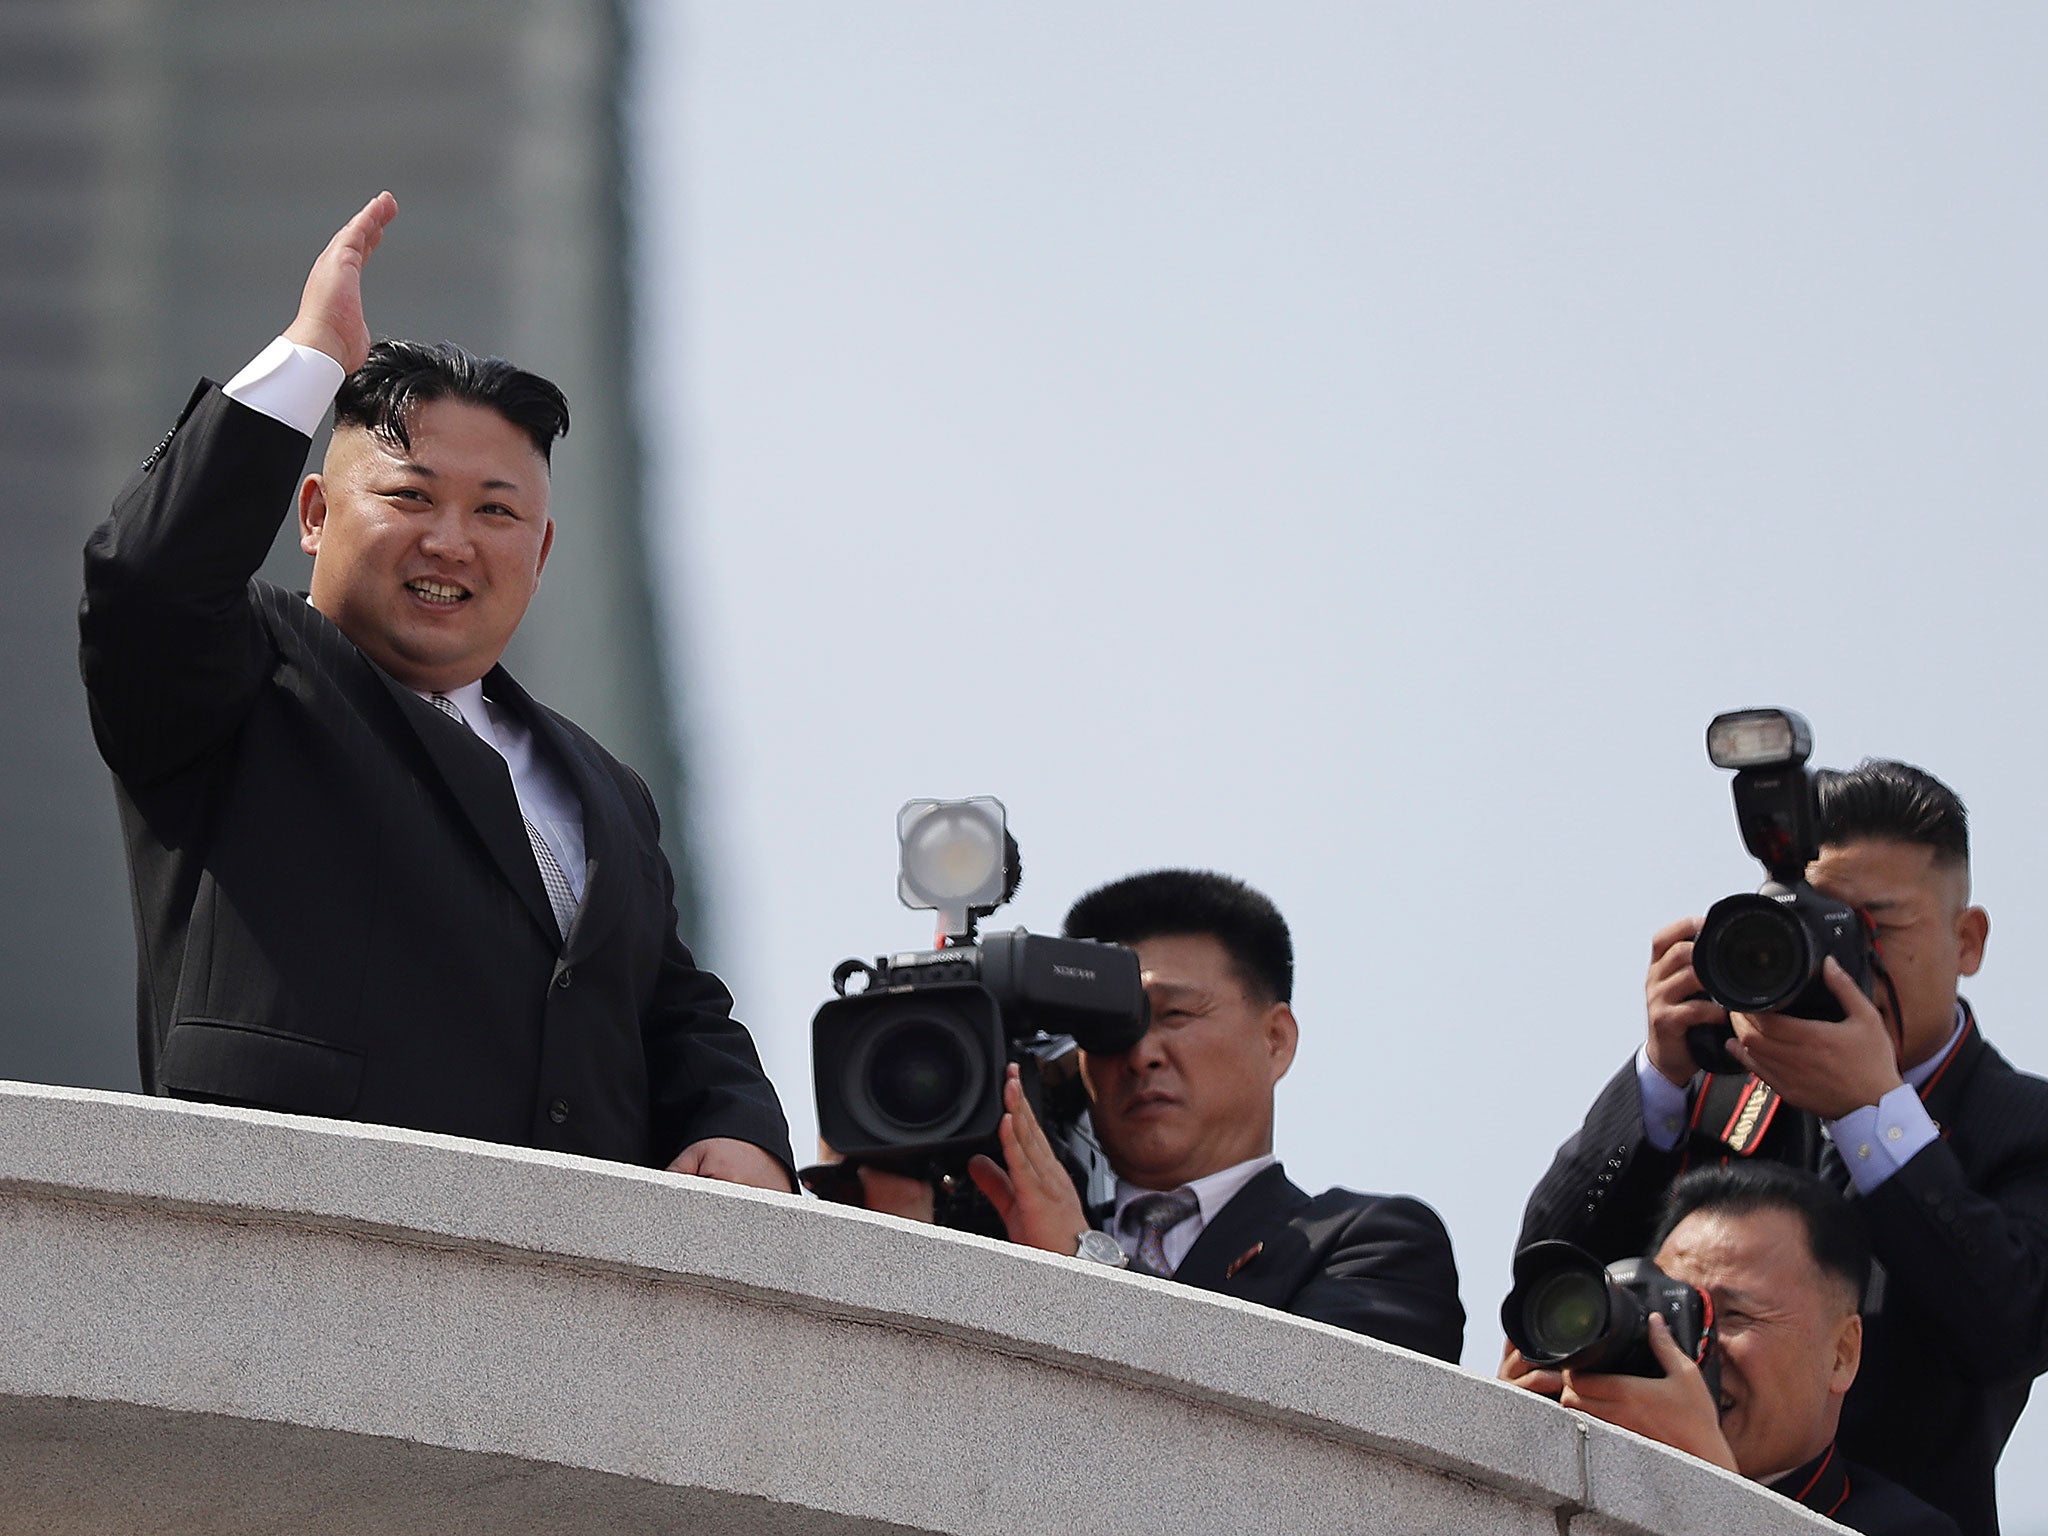 Kim Jong-un has highly armed snatch squads designed to grab foreign diplomats and tourists from across the South Korean border, according to a defector